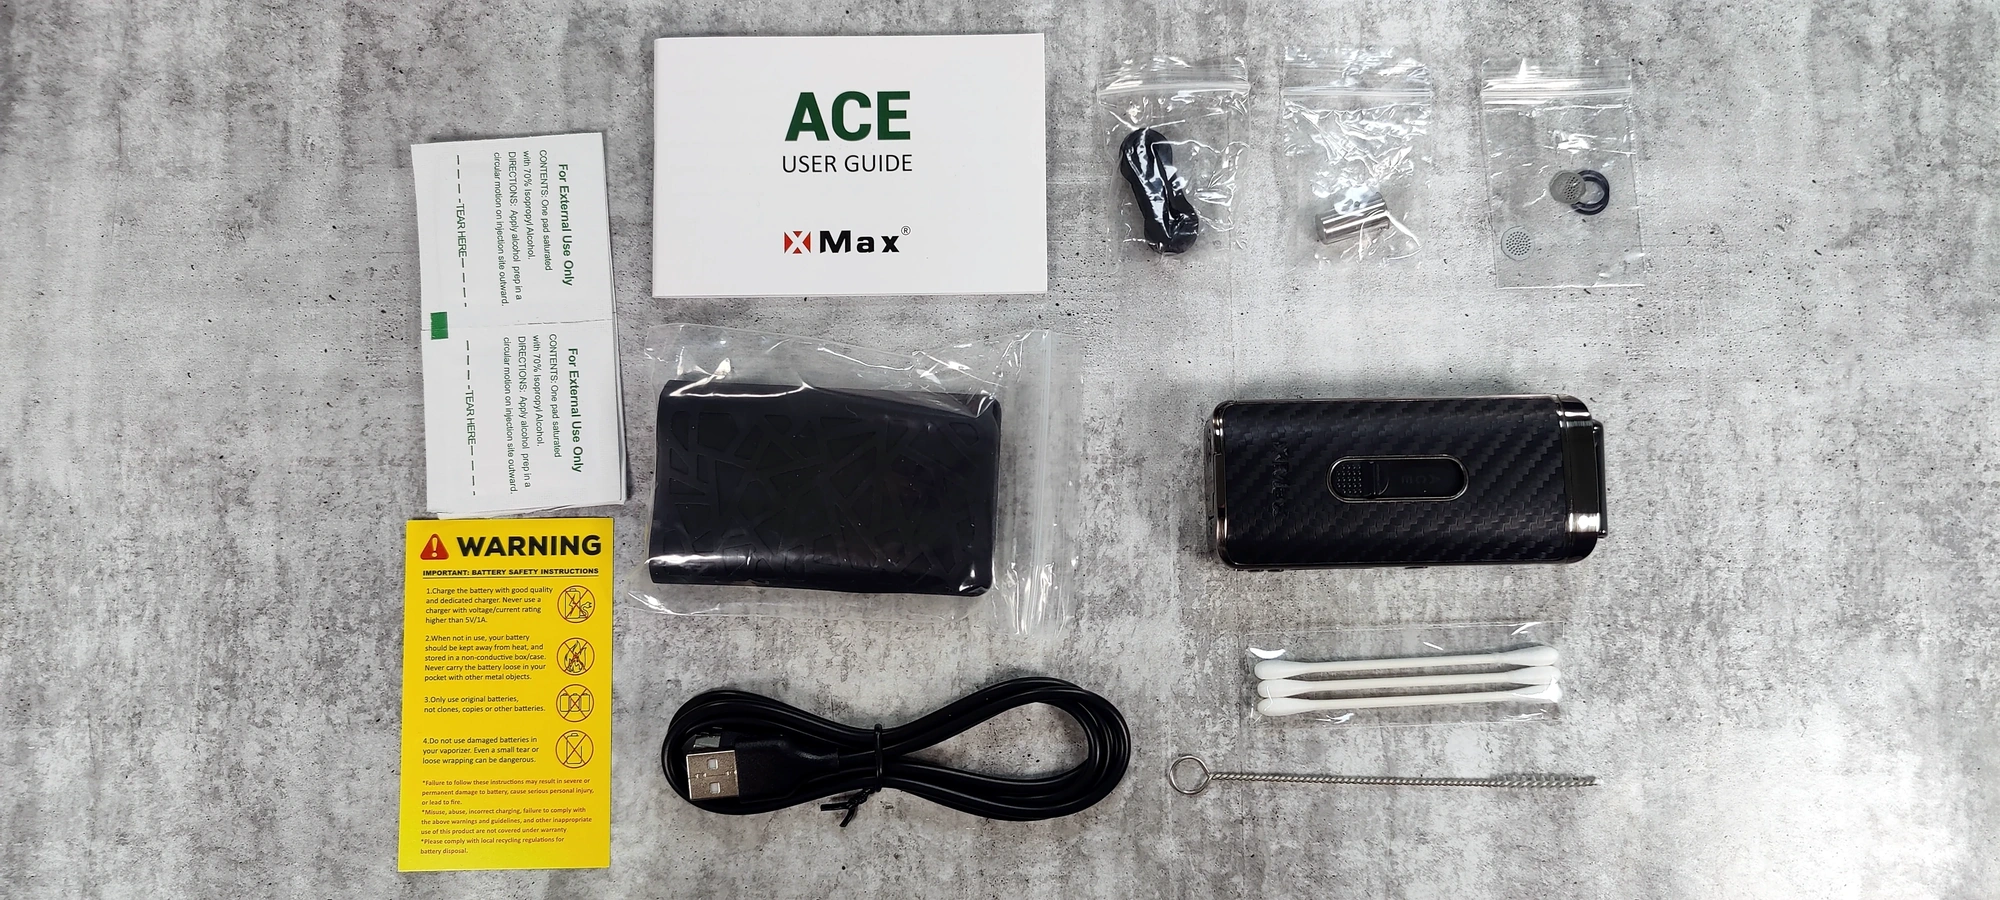 XMAX Ace Package Contents